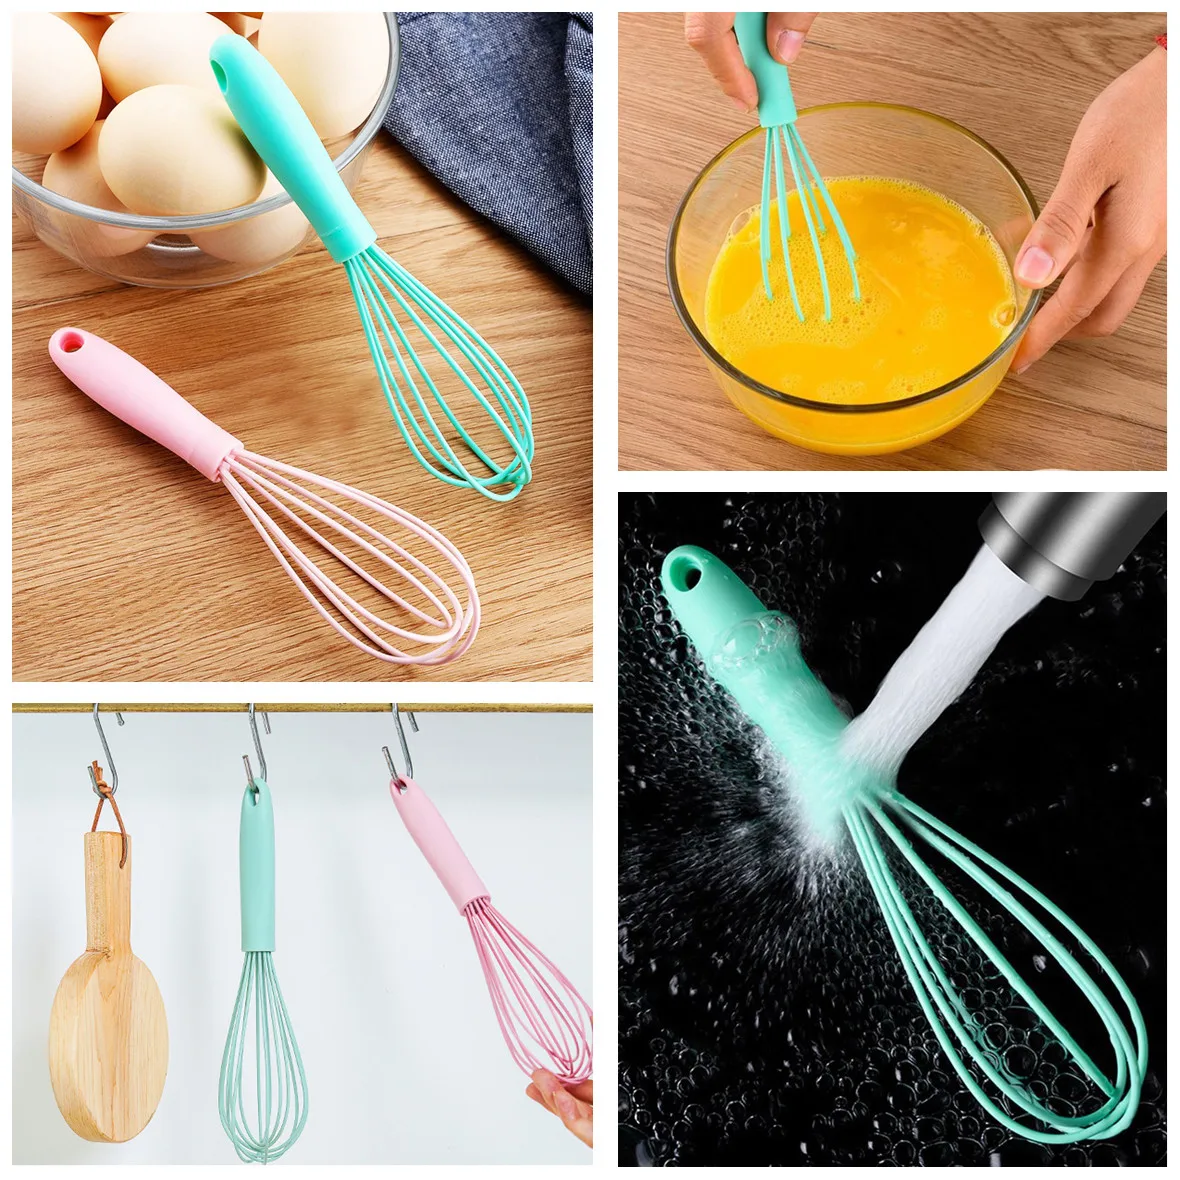 https://ae01.alicdn.com/kf/Sd905394b61b04f74a5aa9d6e39961520E/5-Pack-Mini-Silicone-Whisks-Small-Hand-Whisk-Rubber-Cooking-Whisk-Stainless-Steel-Non-Stick-Kitchen.jpg